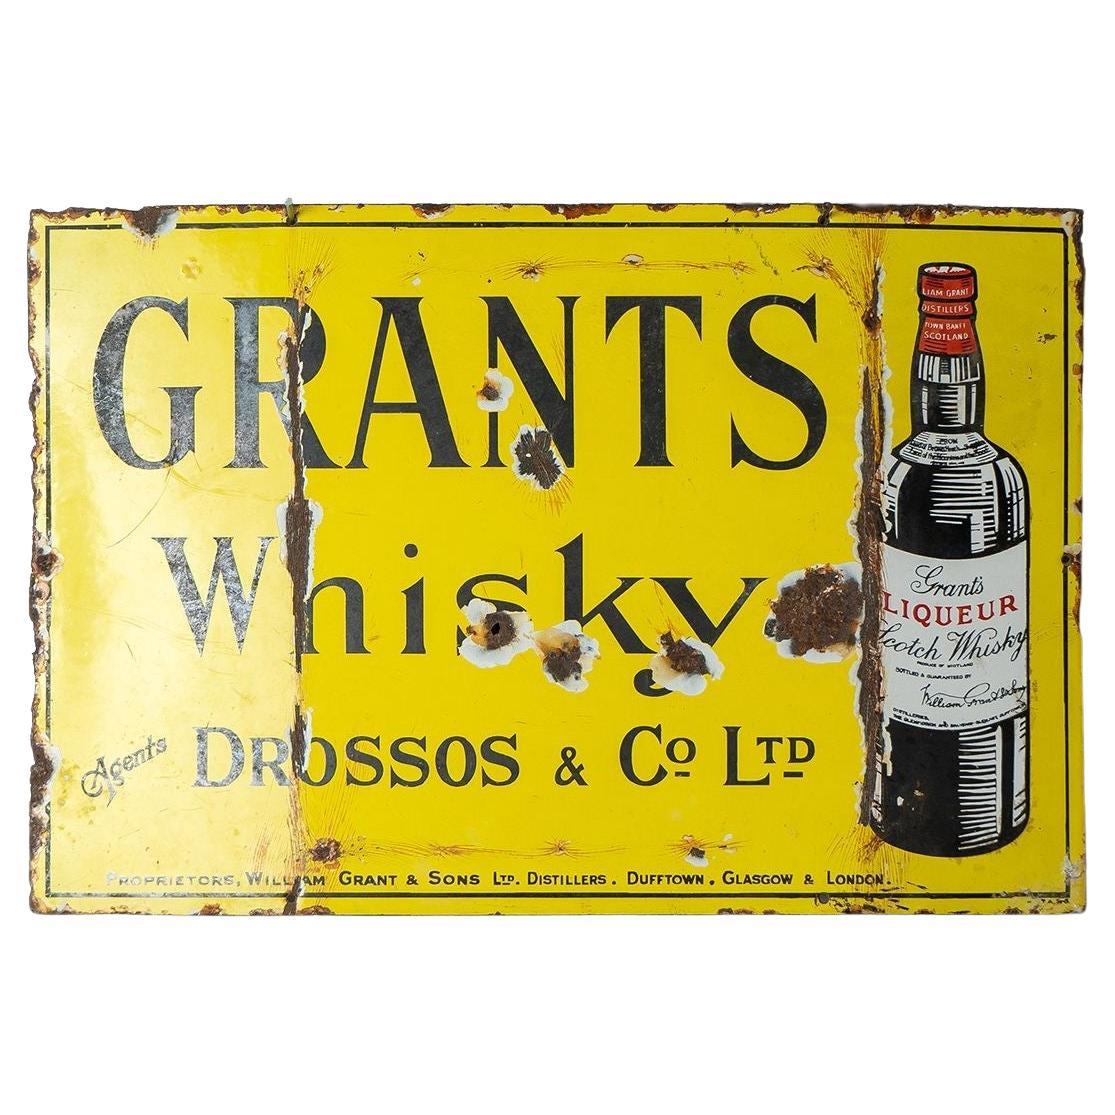 Vintage Grants Scotch Whisky Enamel Advertising Sign, Early 20th Century Whiskey